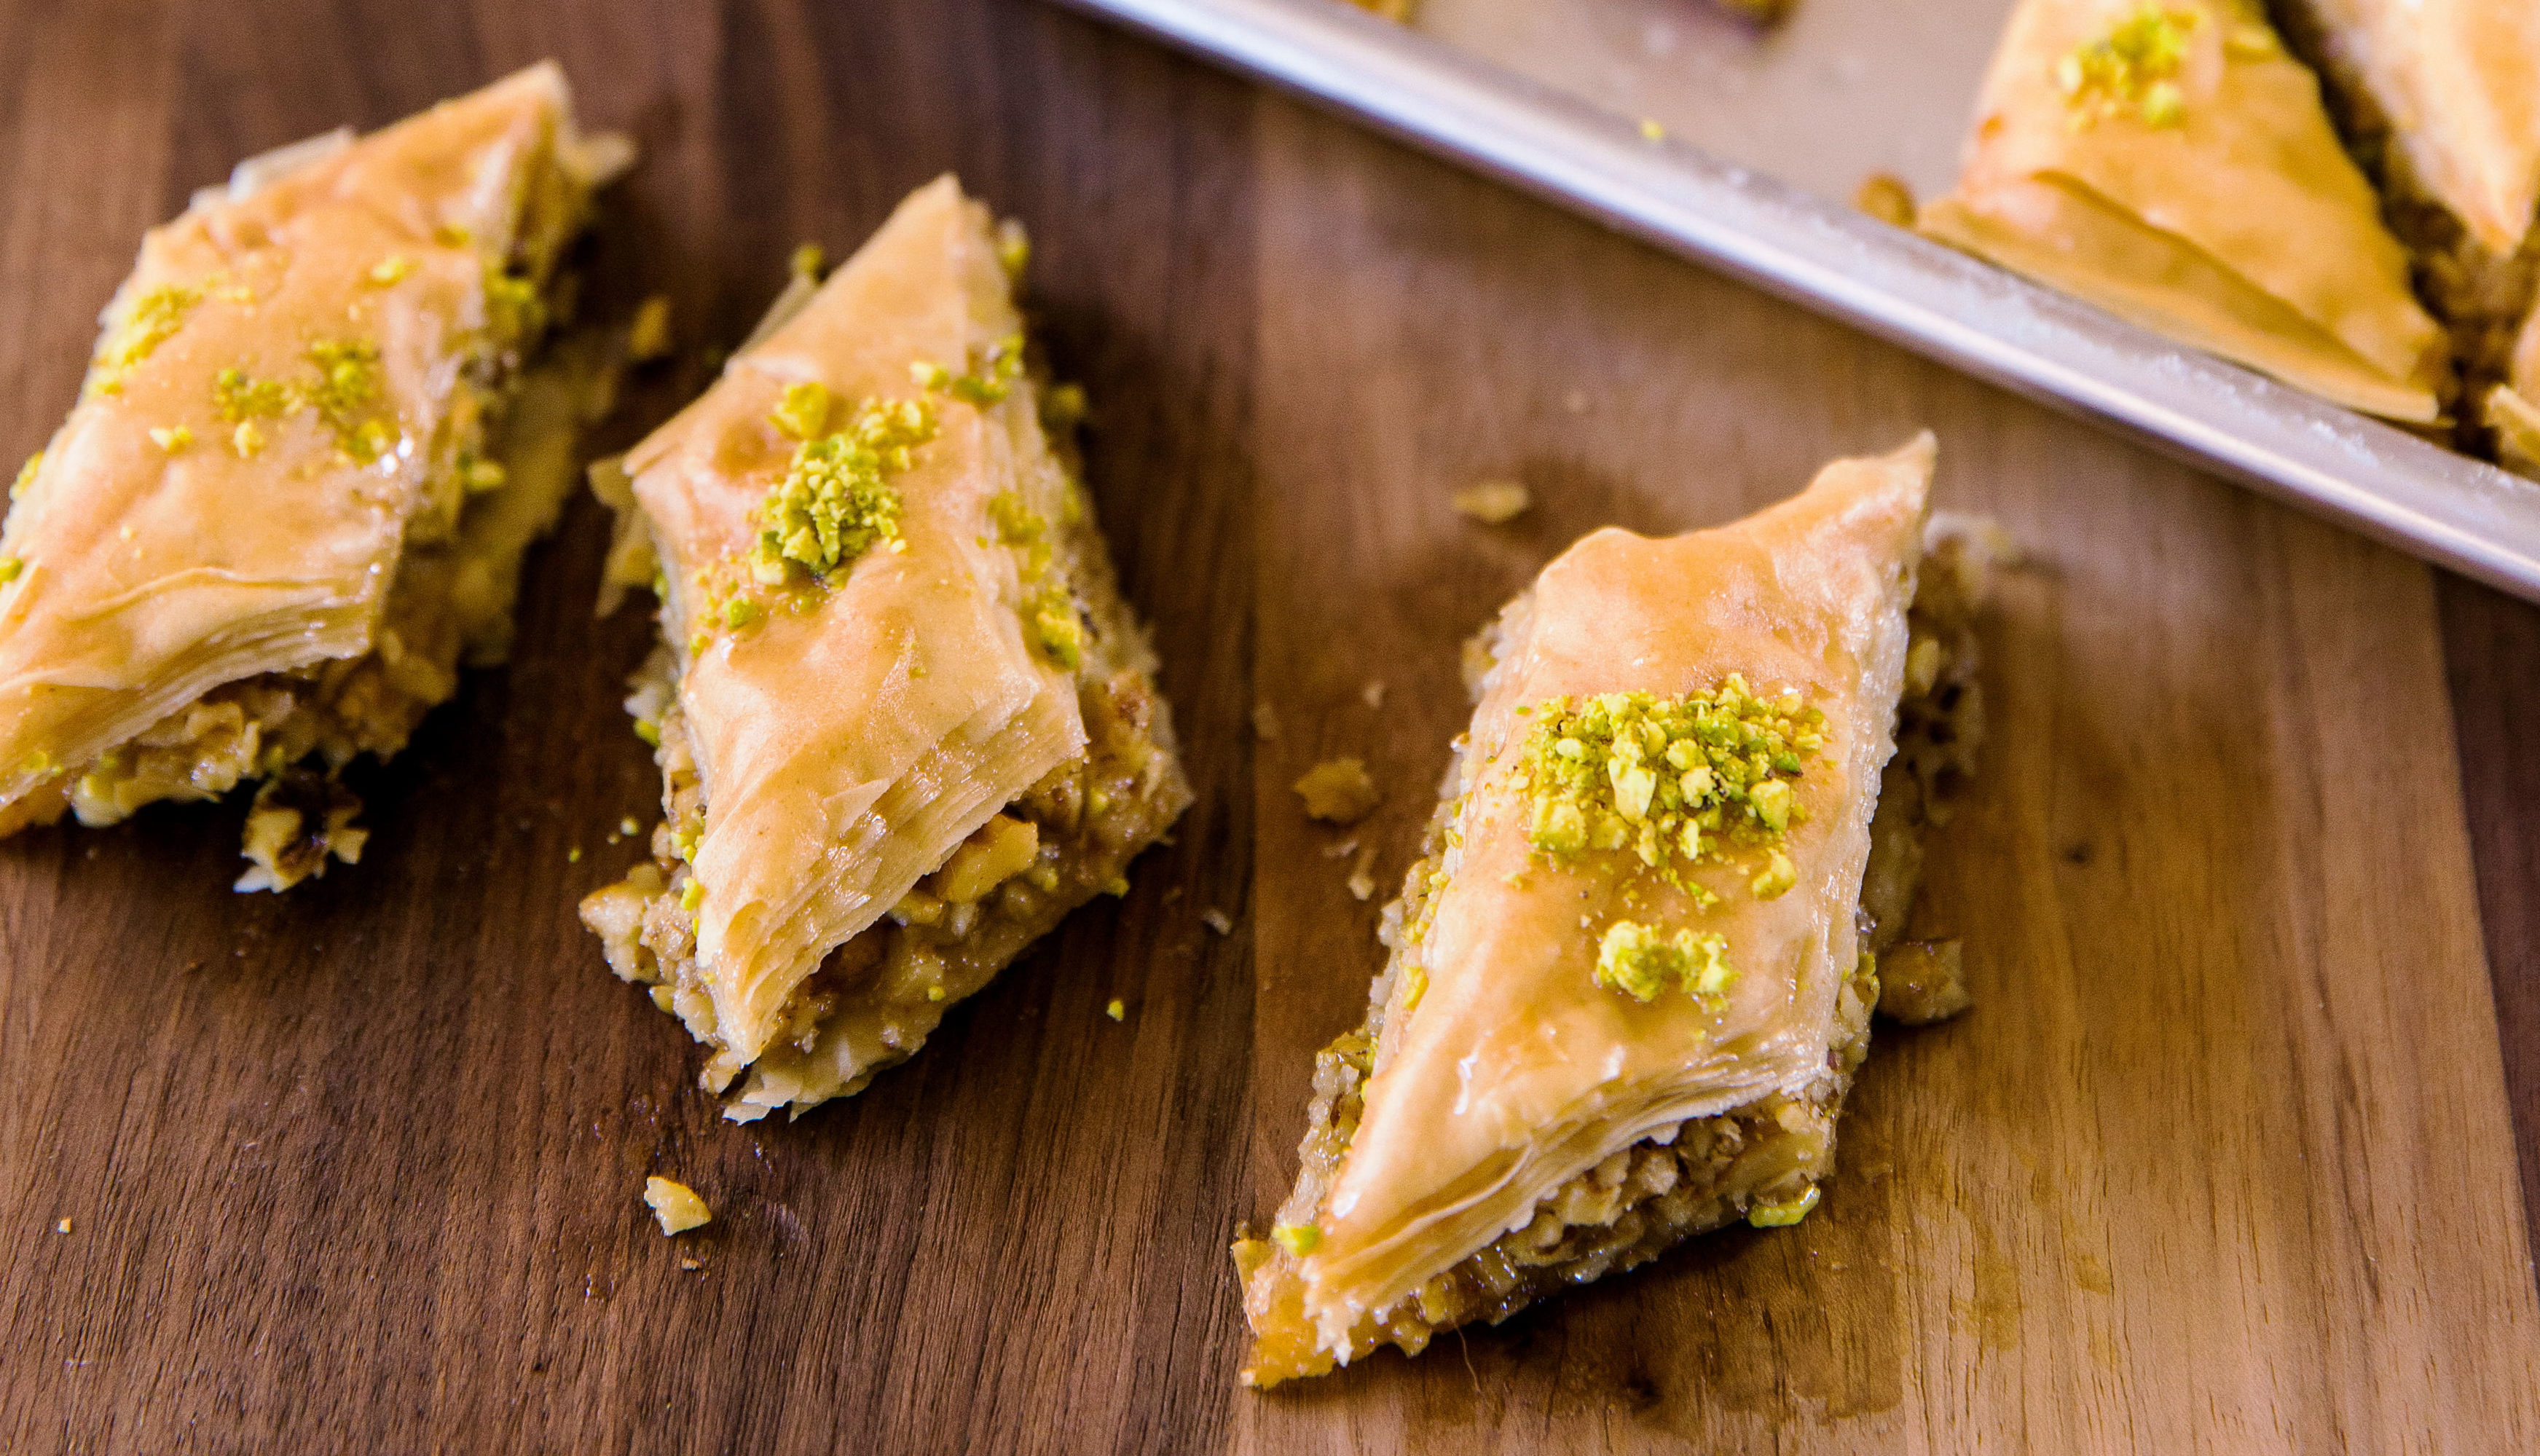 Baklava: A layered pastry dessert made of filo pastry, Food. 3490x2000 HD Wallpaper.